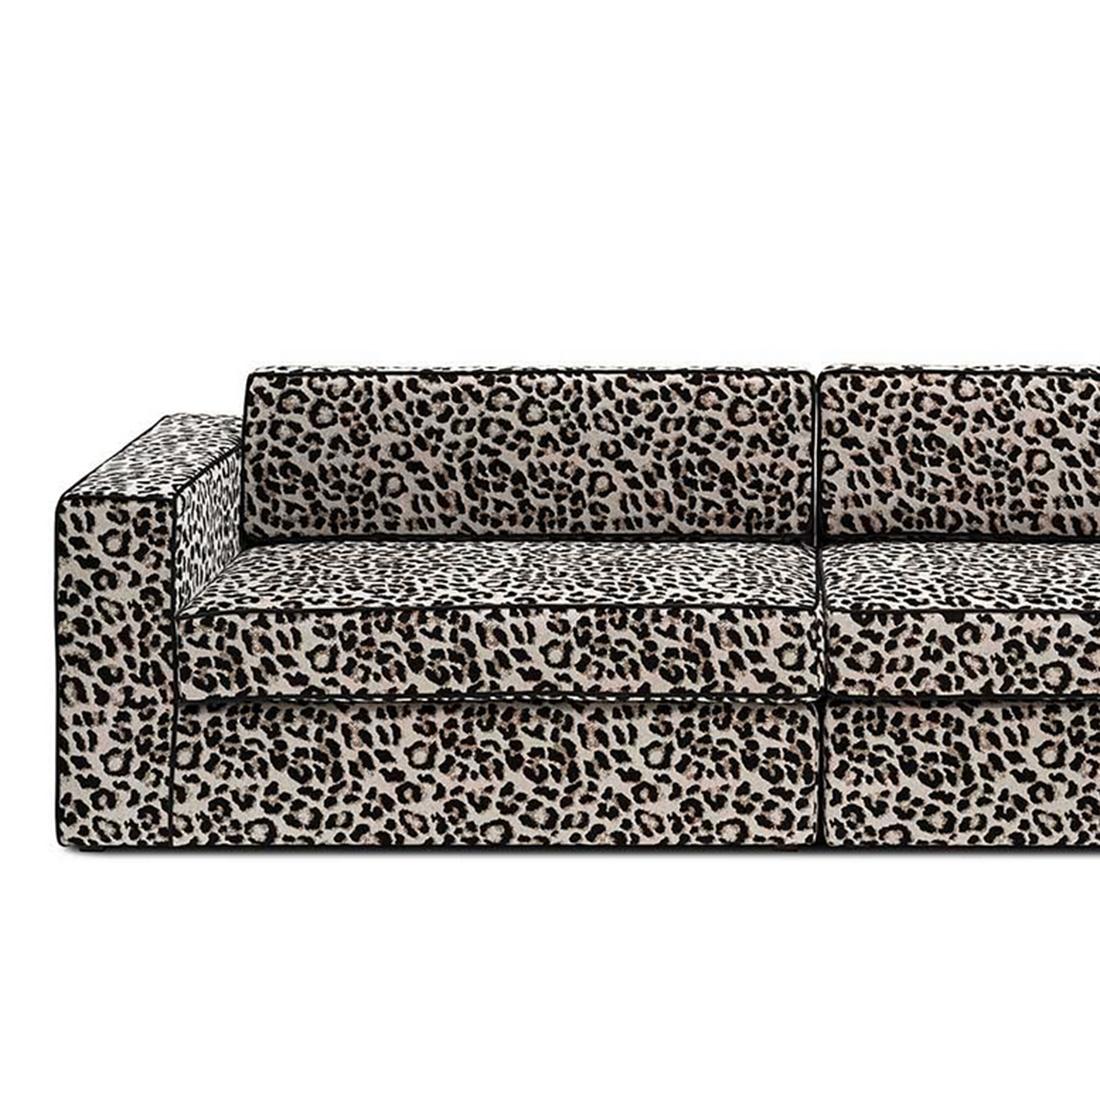 Sofa snow leopard 3-seat with wooden
structure. Upholstered and covered
with smooth velvet leopard fabric.
Also available with natural leopard velvet fabric.